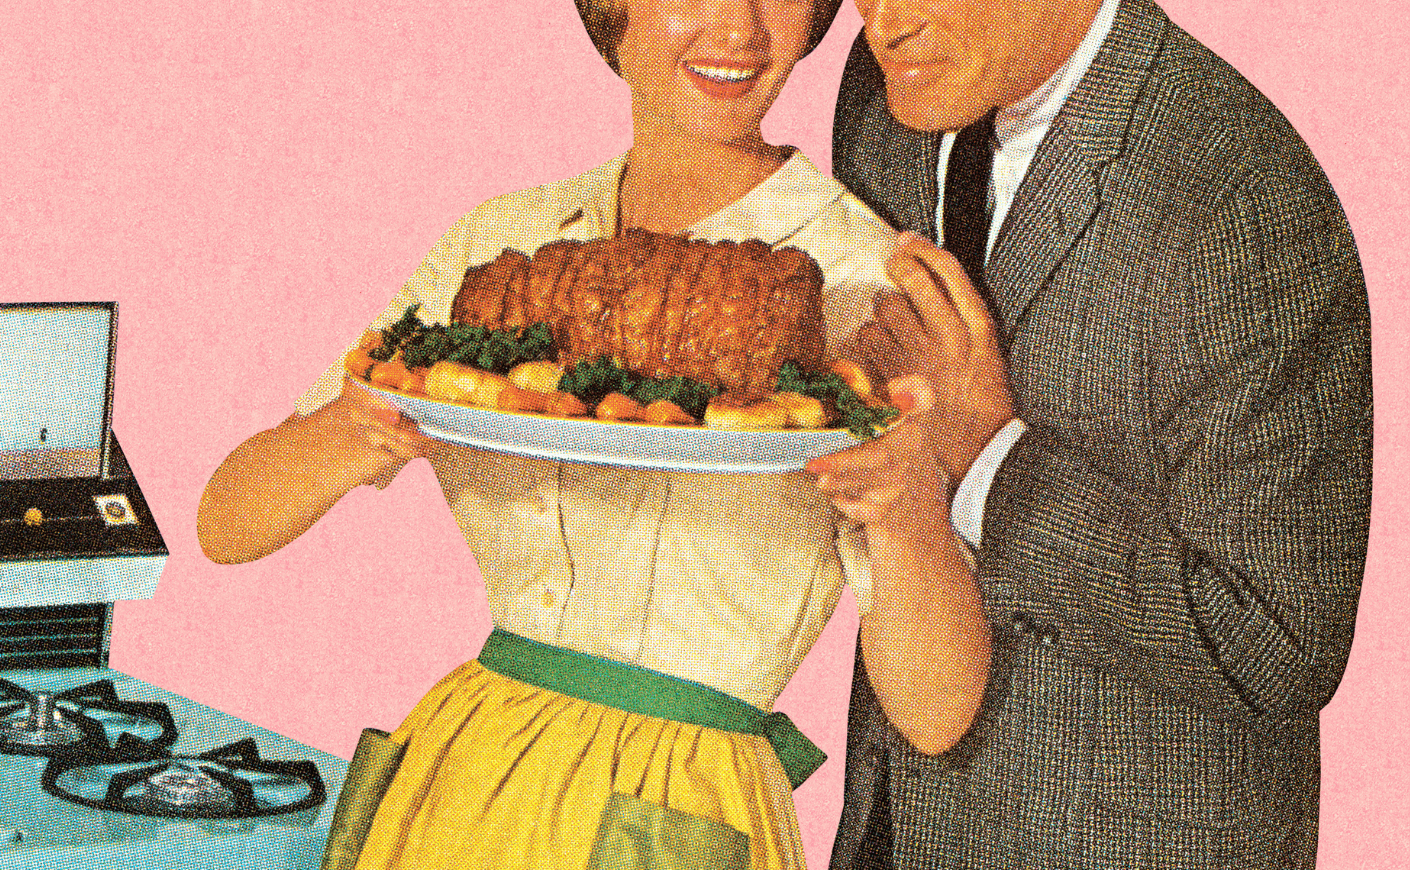 vintage image of a woman holding a roast